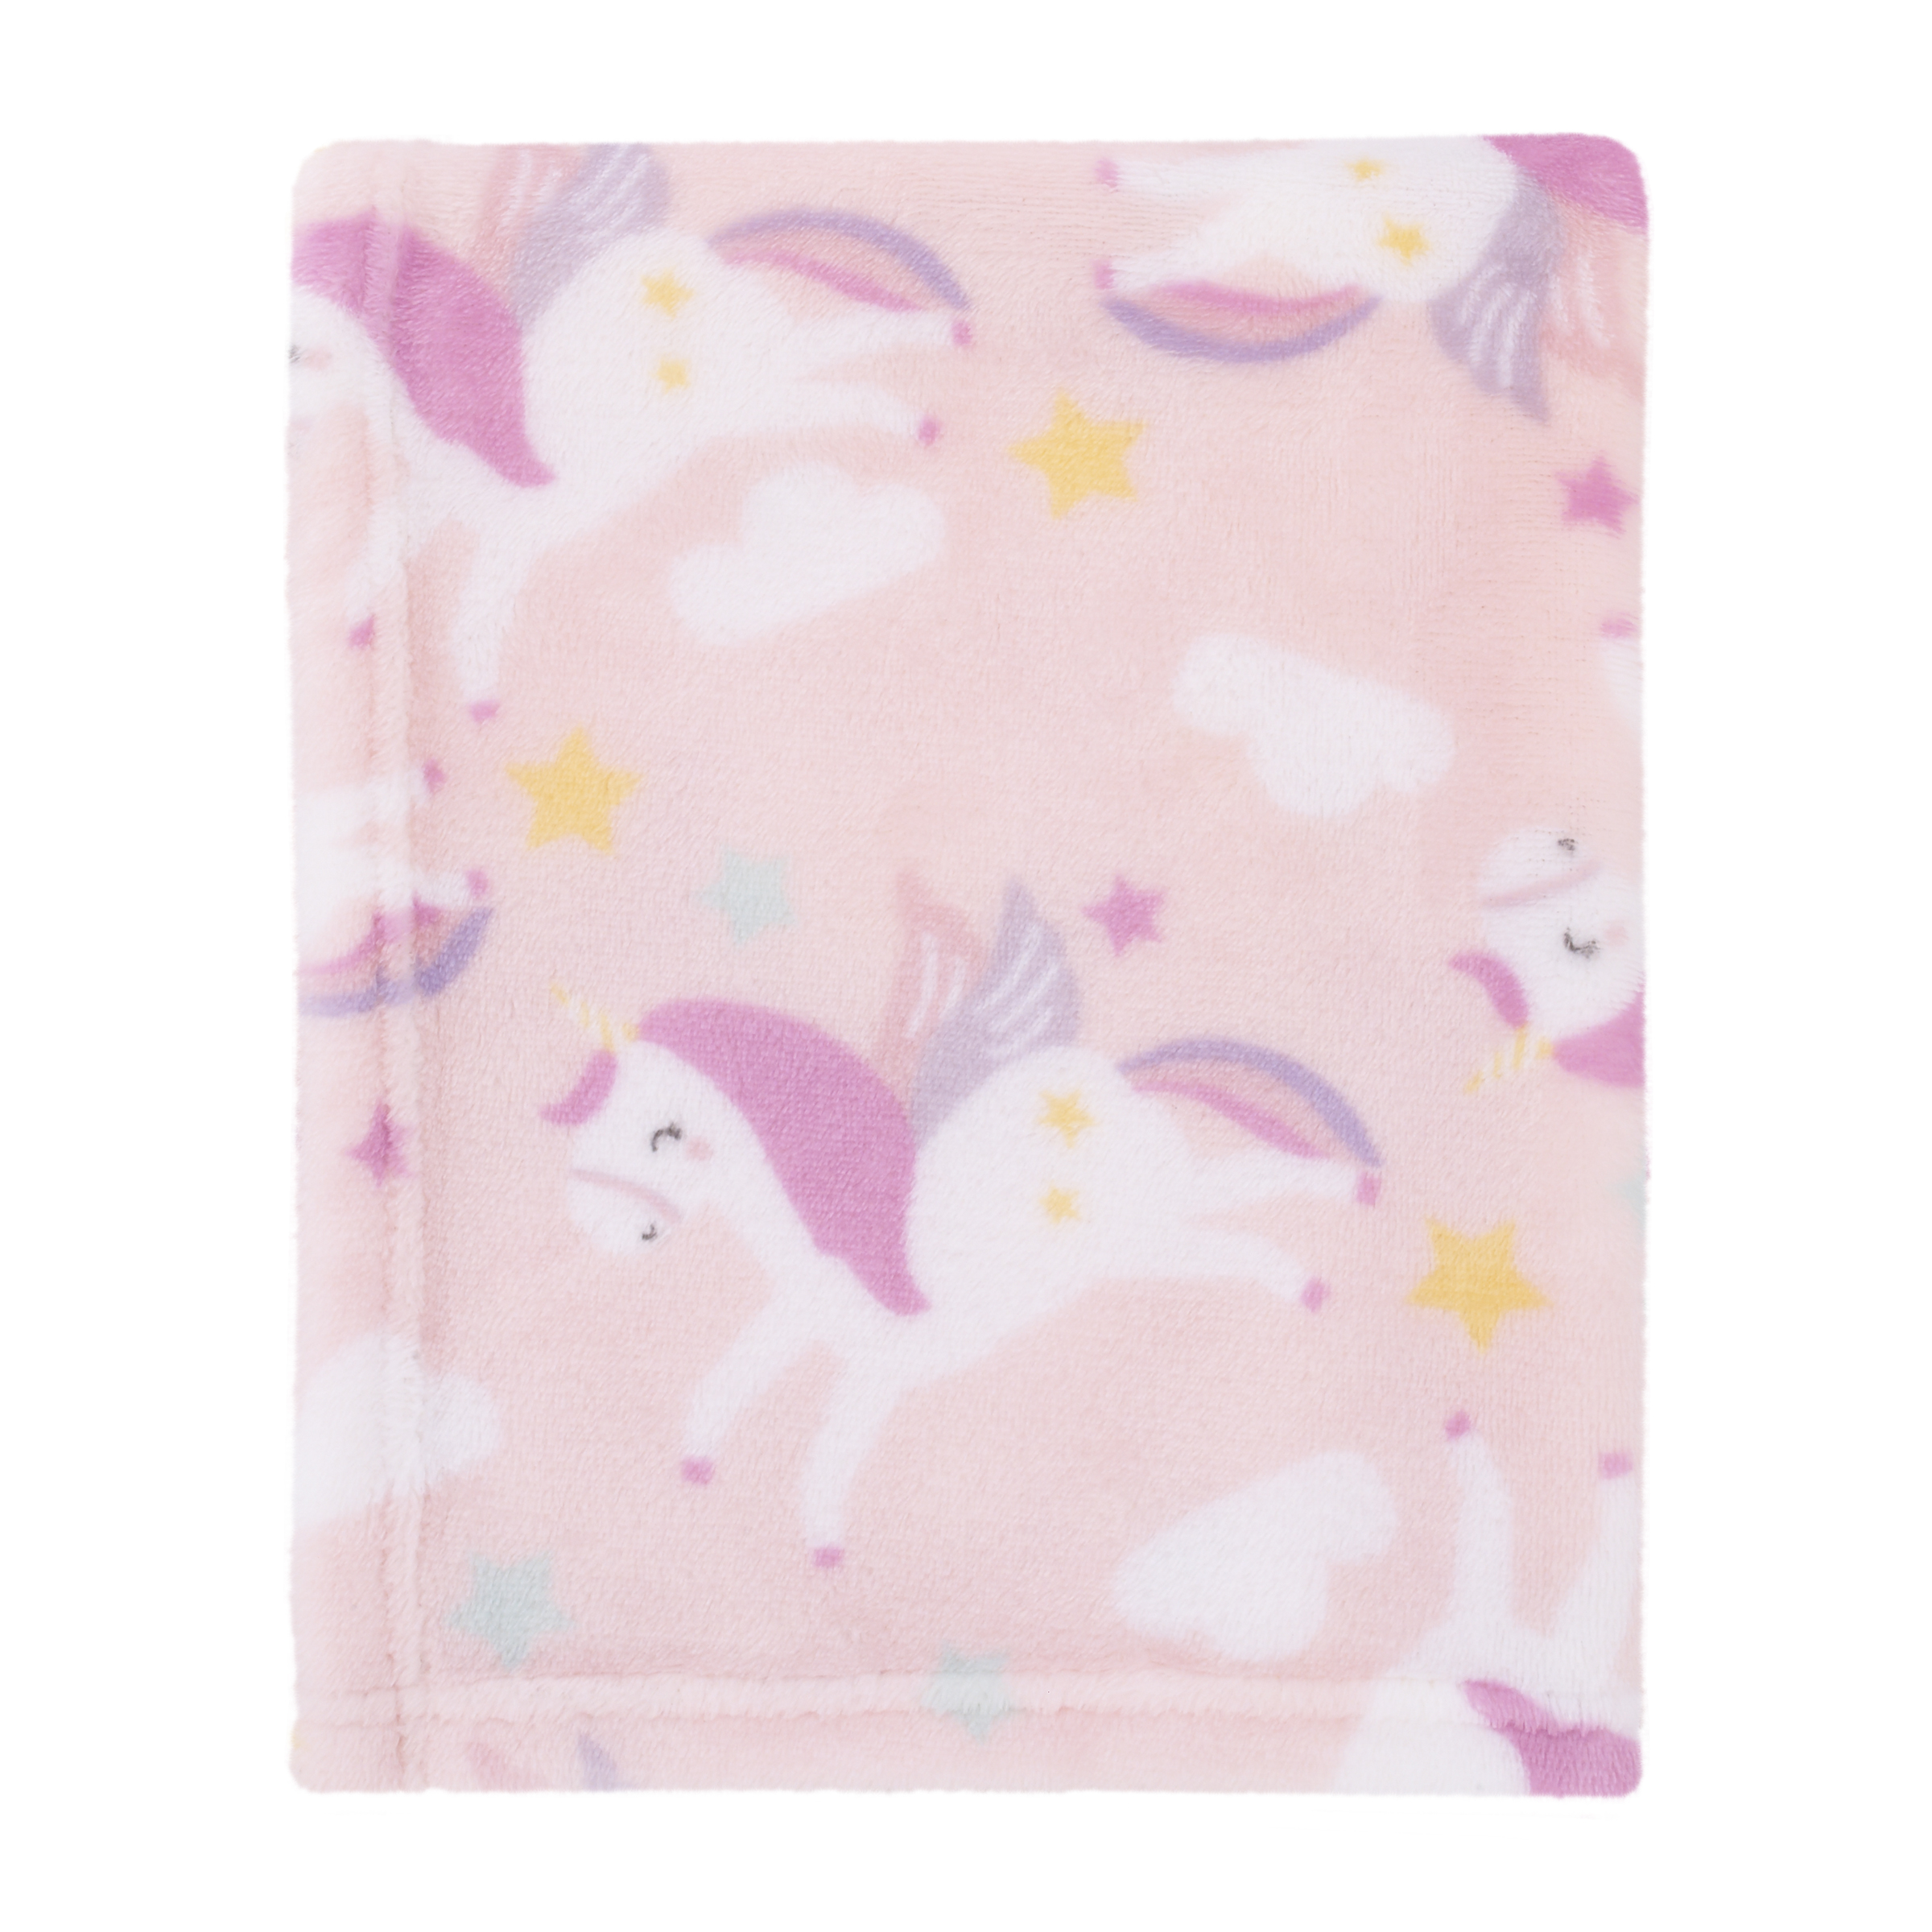 Parent's Choice Plush Baby Blanket, Pink Unicorn Print, 30x36 inches, Pink, White, Infant Girl - image 2 of 7